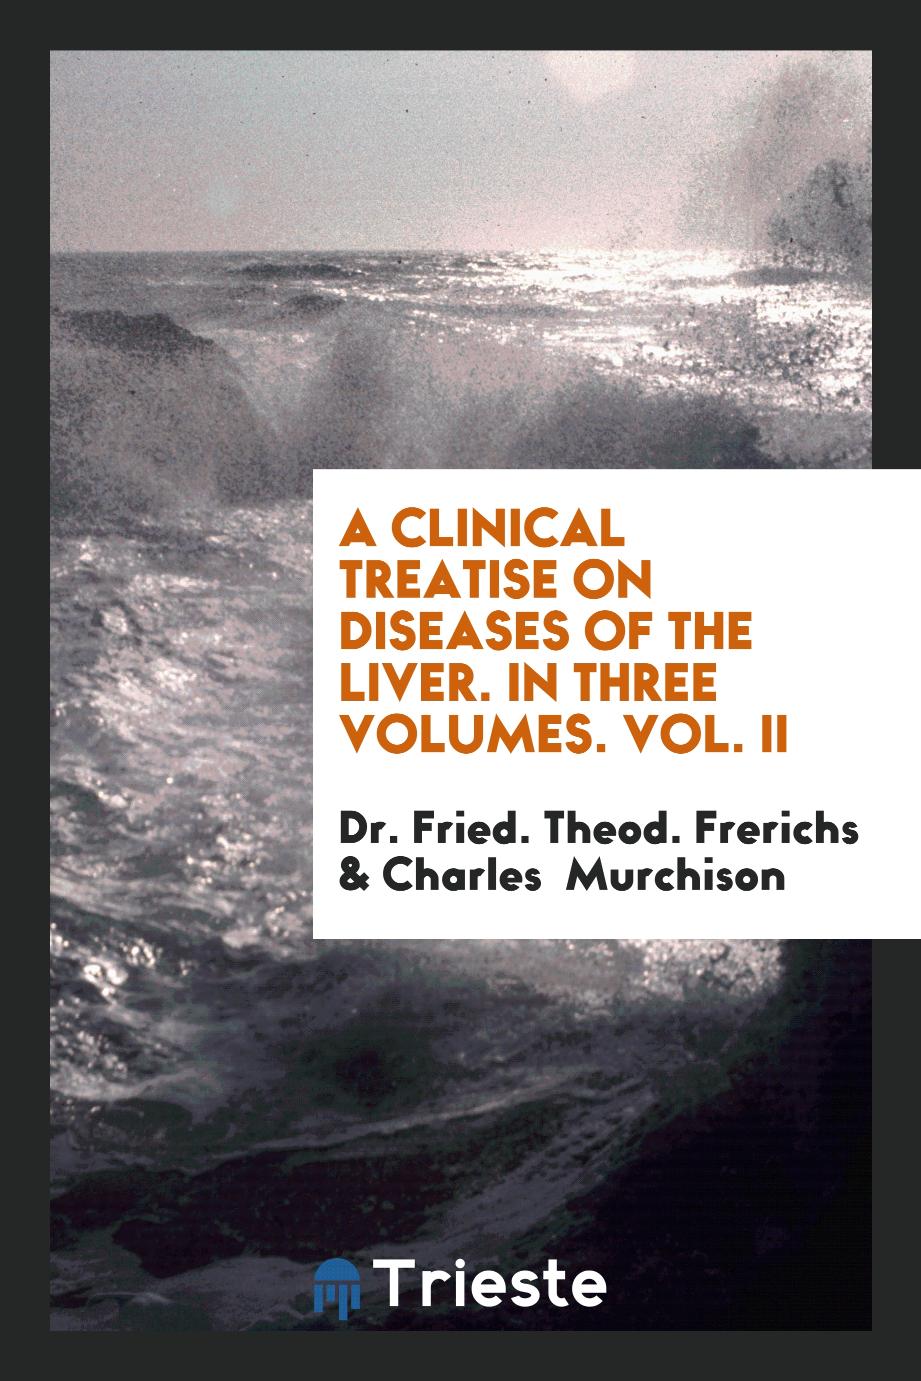 A Clinical Treatise on Diseases of the Liver. In Three Volumes. Vol. II